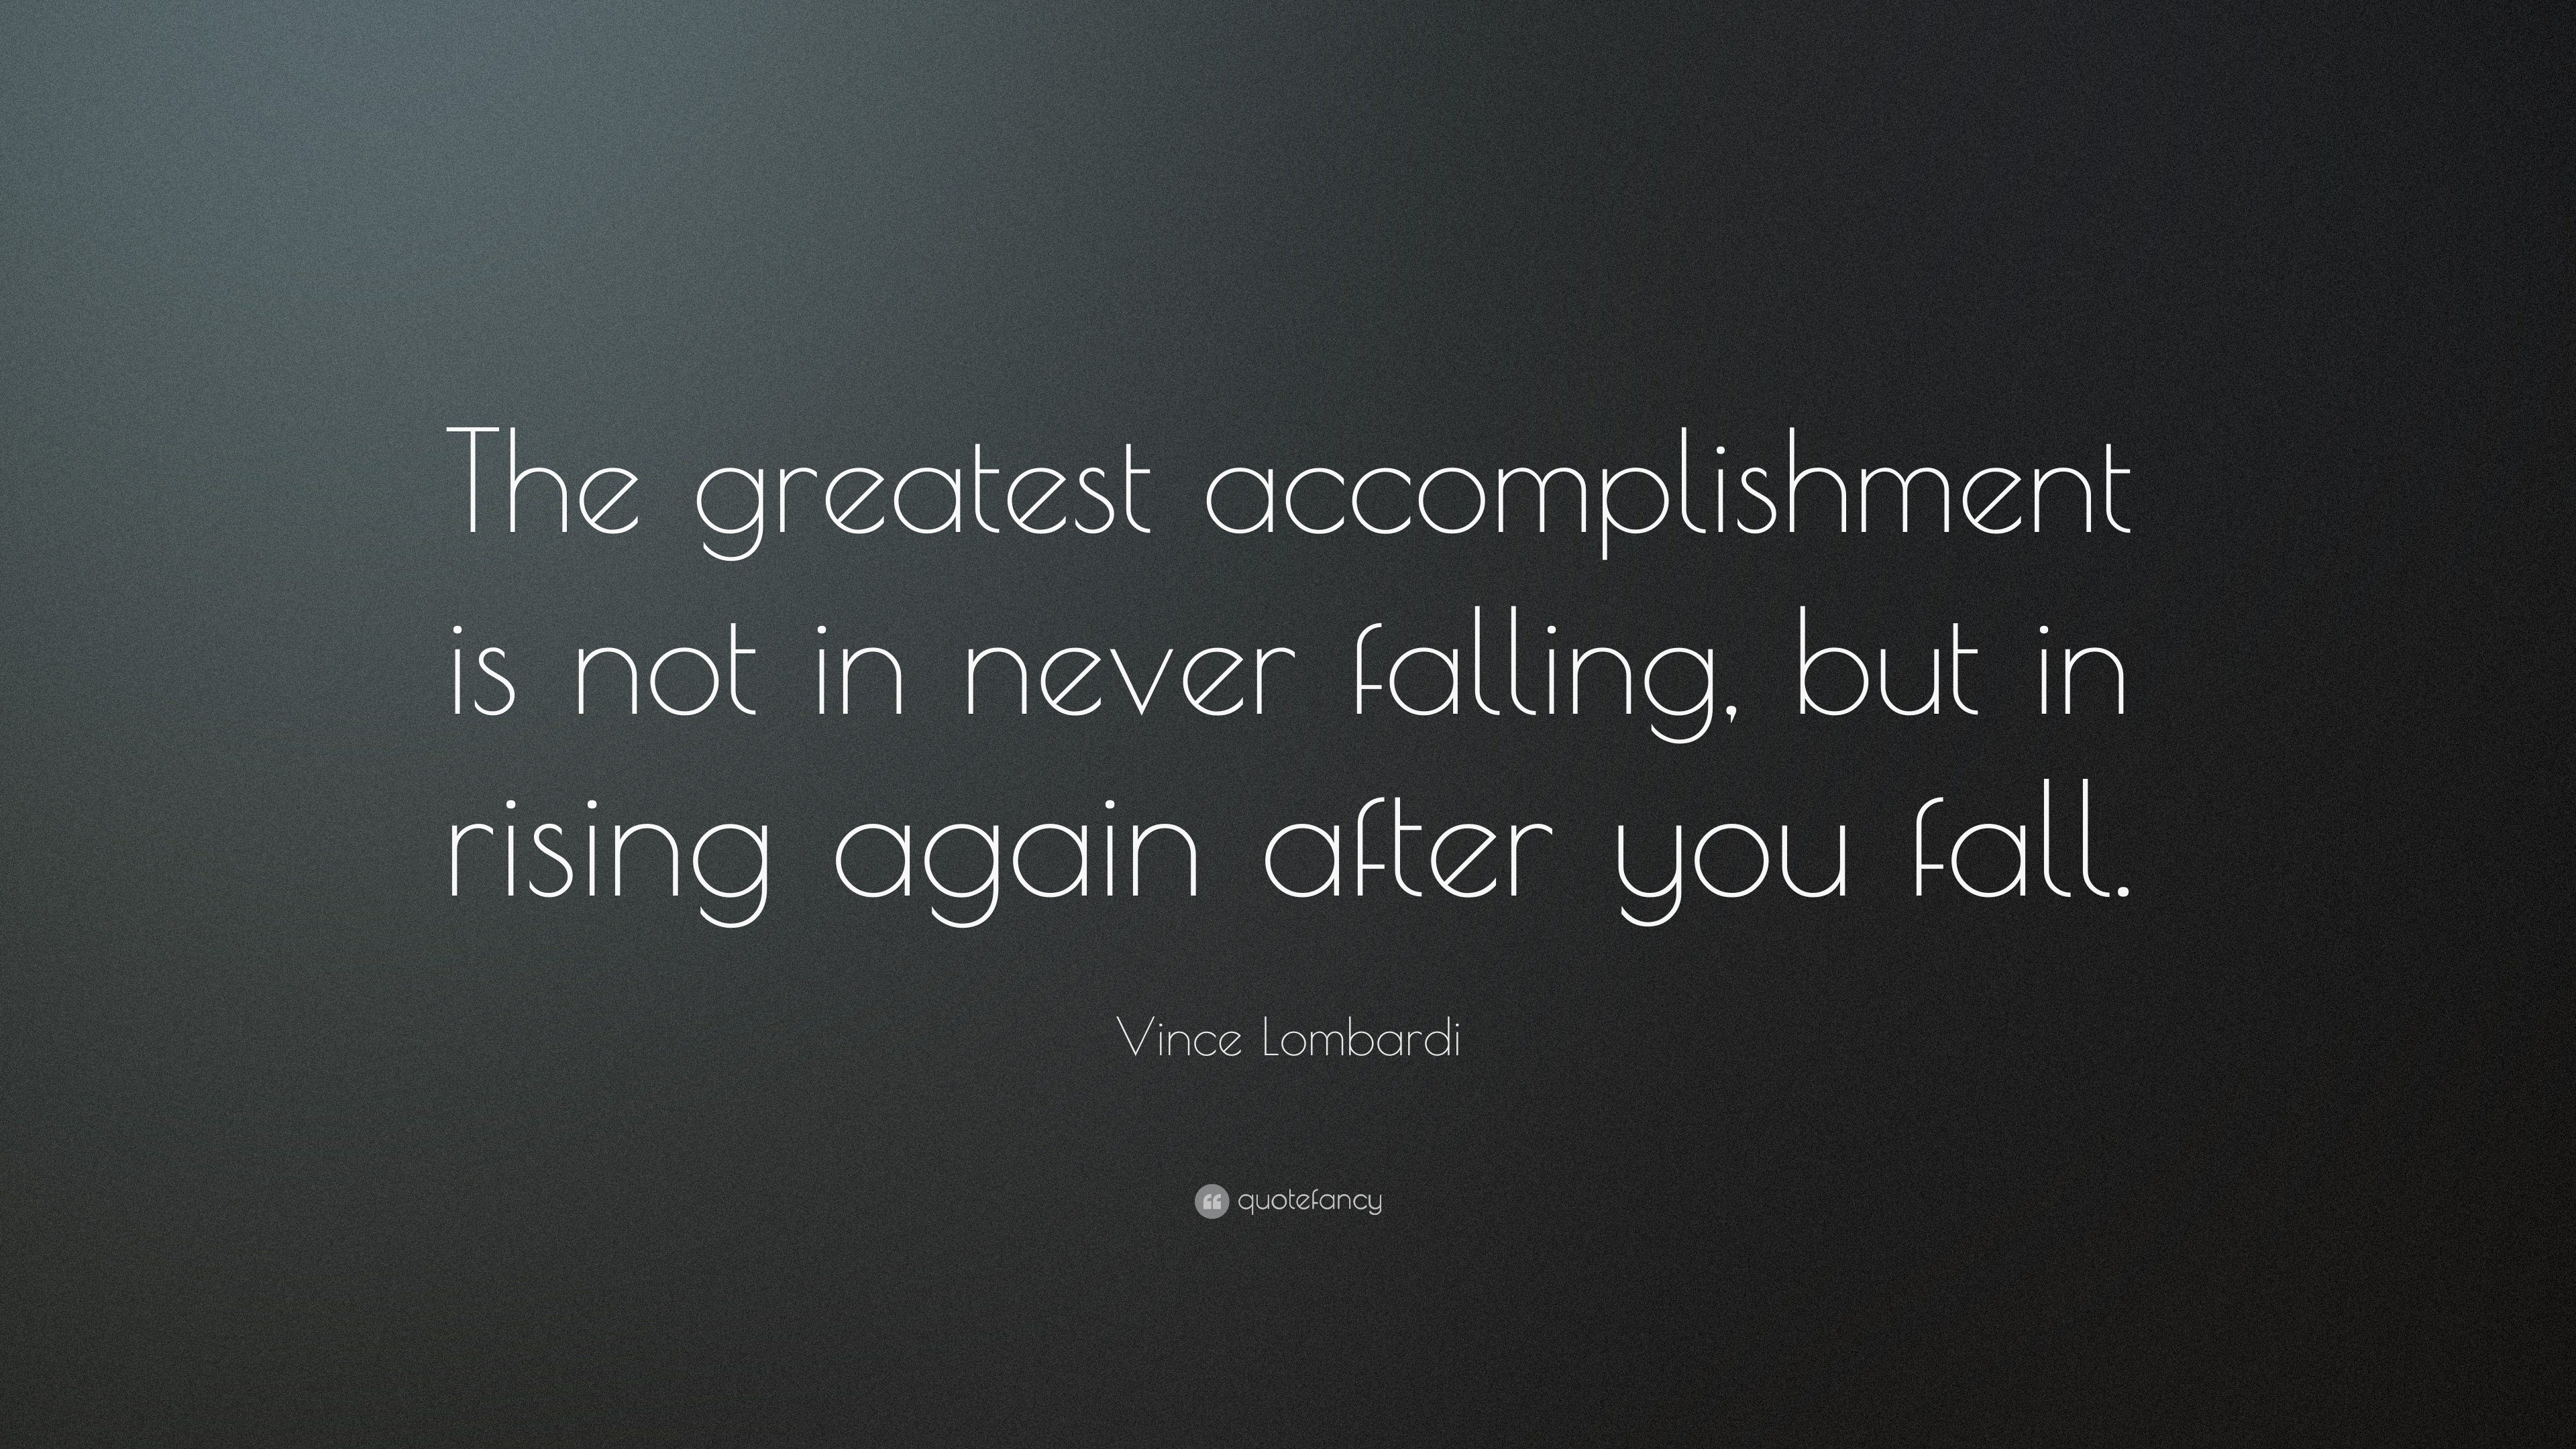 ... is not in never falling, but in rising again after you fall